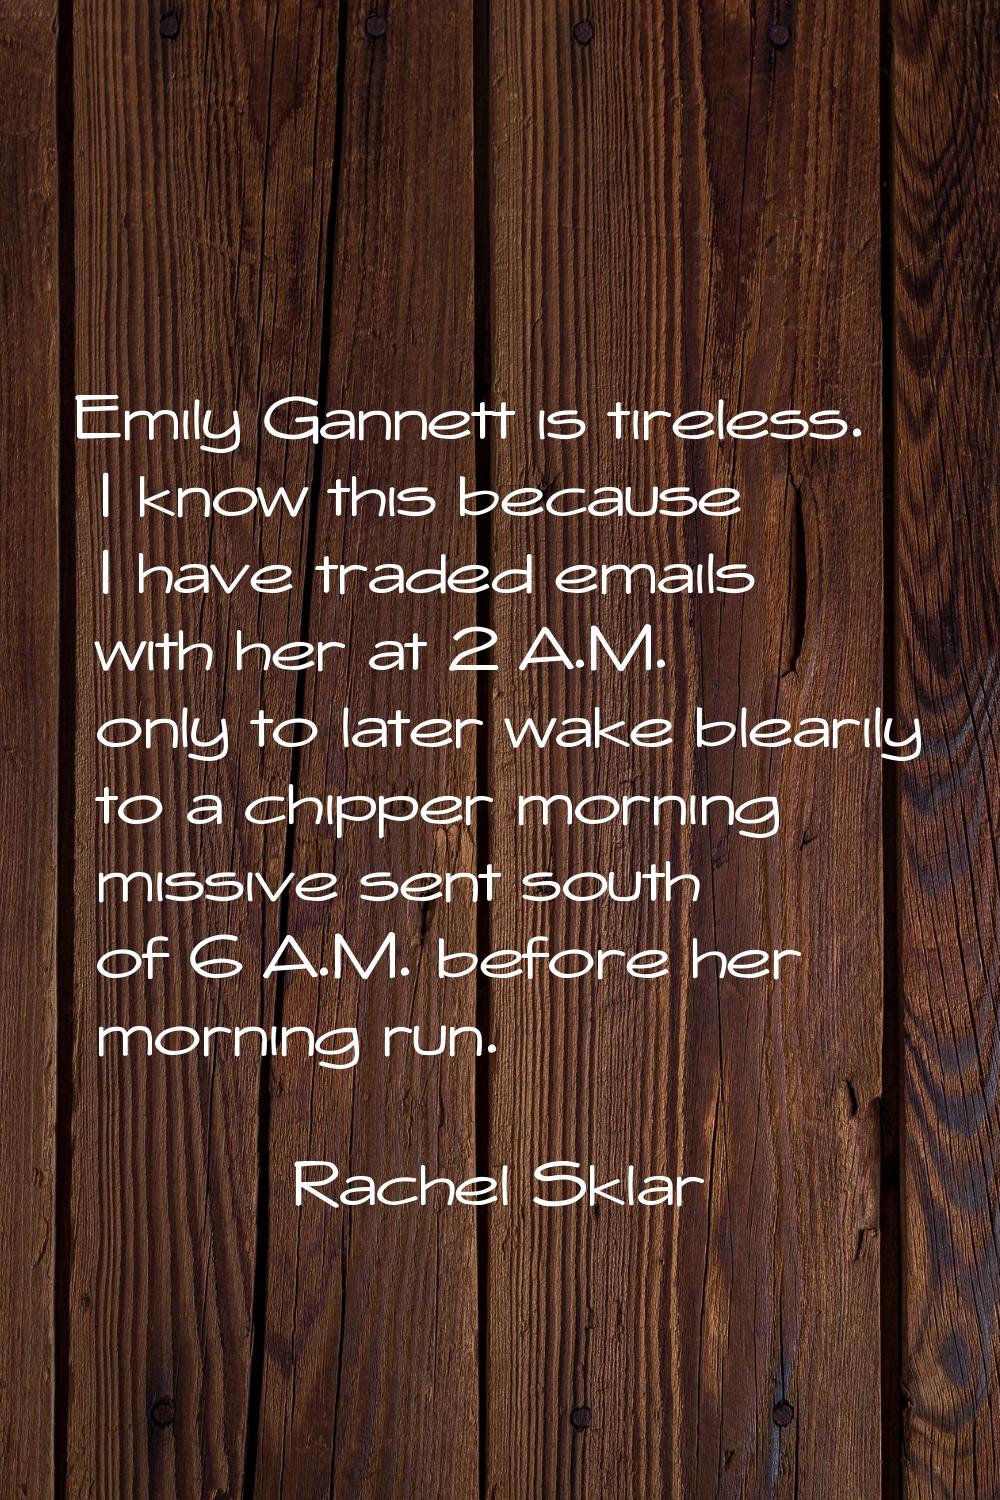 Emily Gannett is tireless. I know this because I have traded emails with her at 2 A.M. only to late